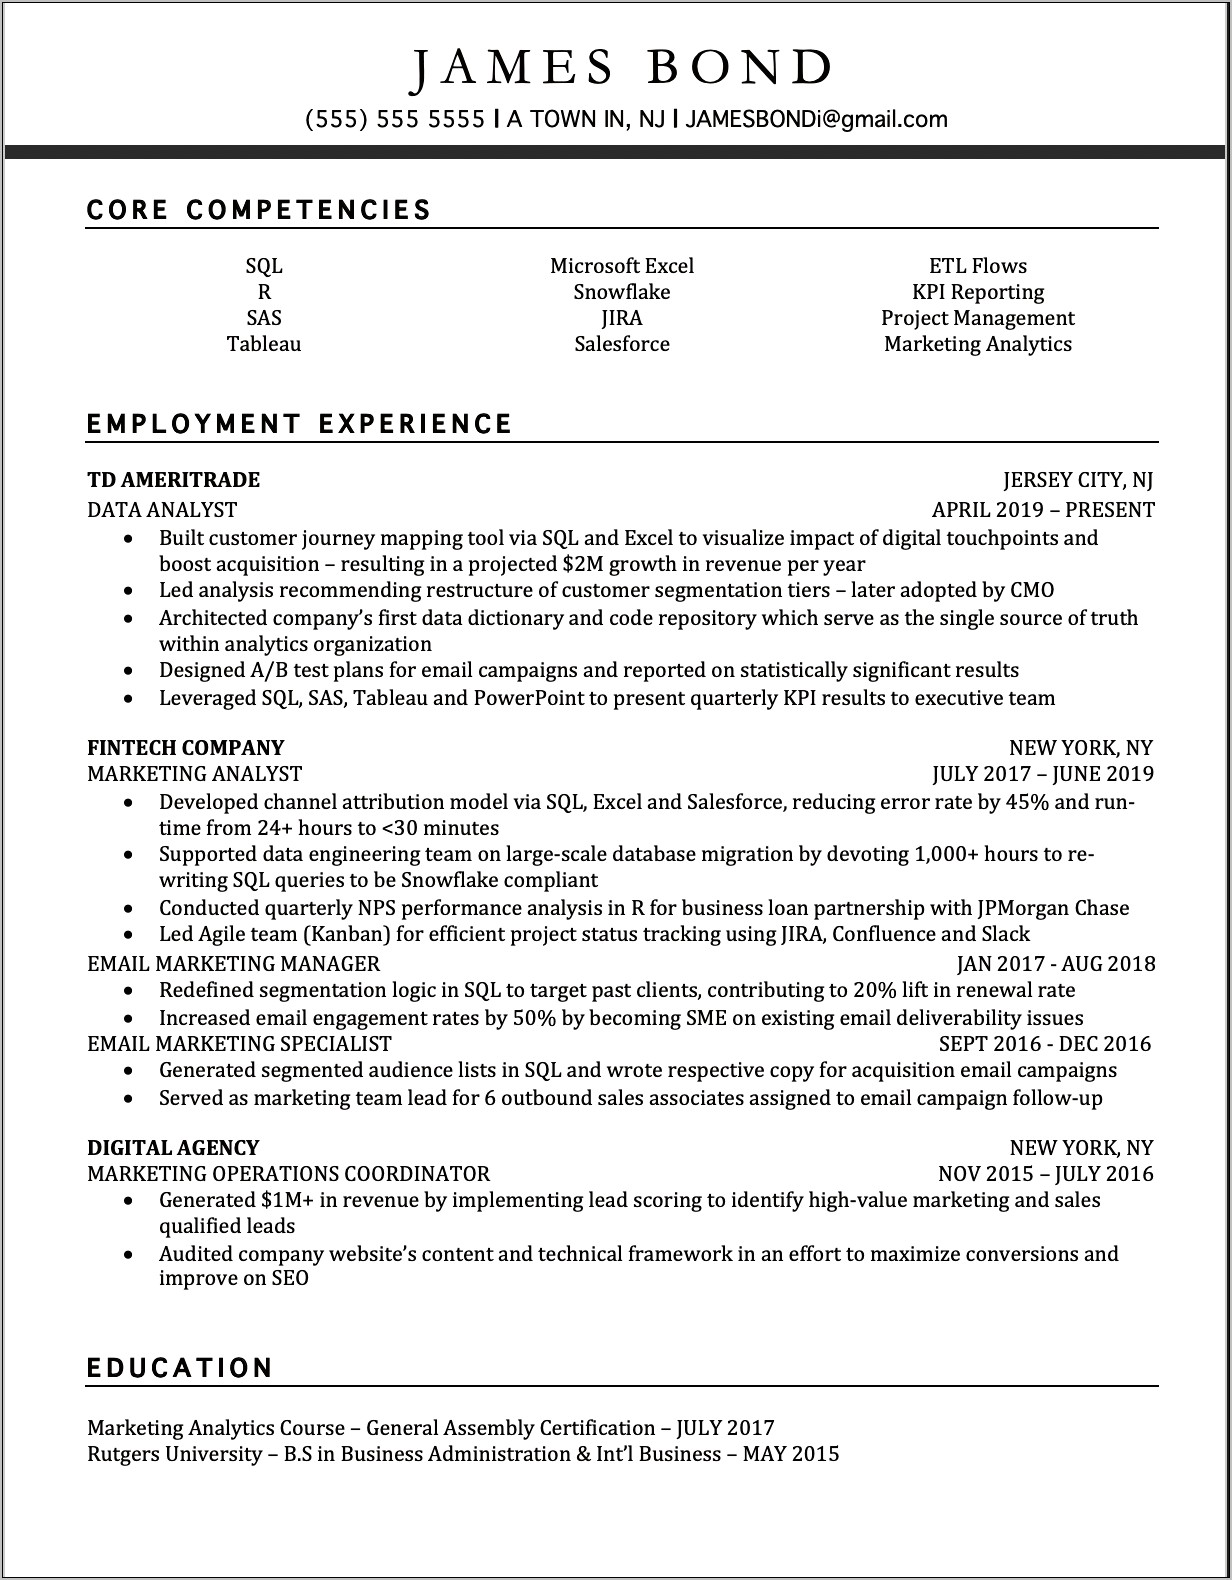 Resume Experience From One Company Multiple Jobs